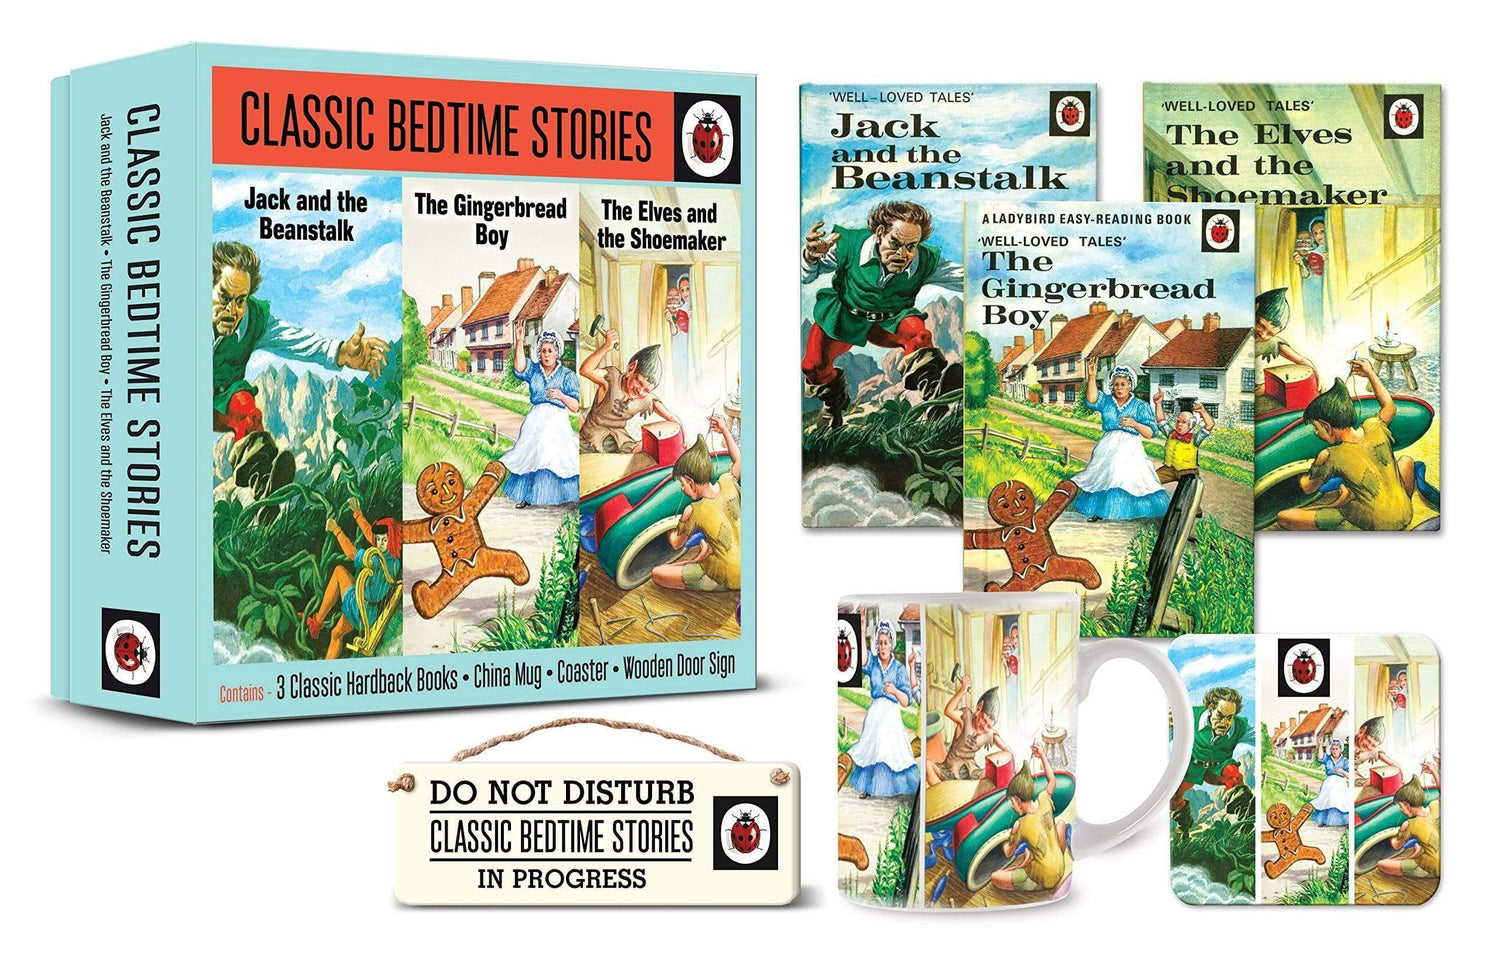 Ladybird Classic Bedtime Stories Box Set: Jack And The Beanstalk, The Gingerbread Boy, The Elves And The Shoemaker